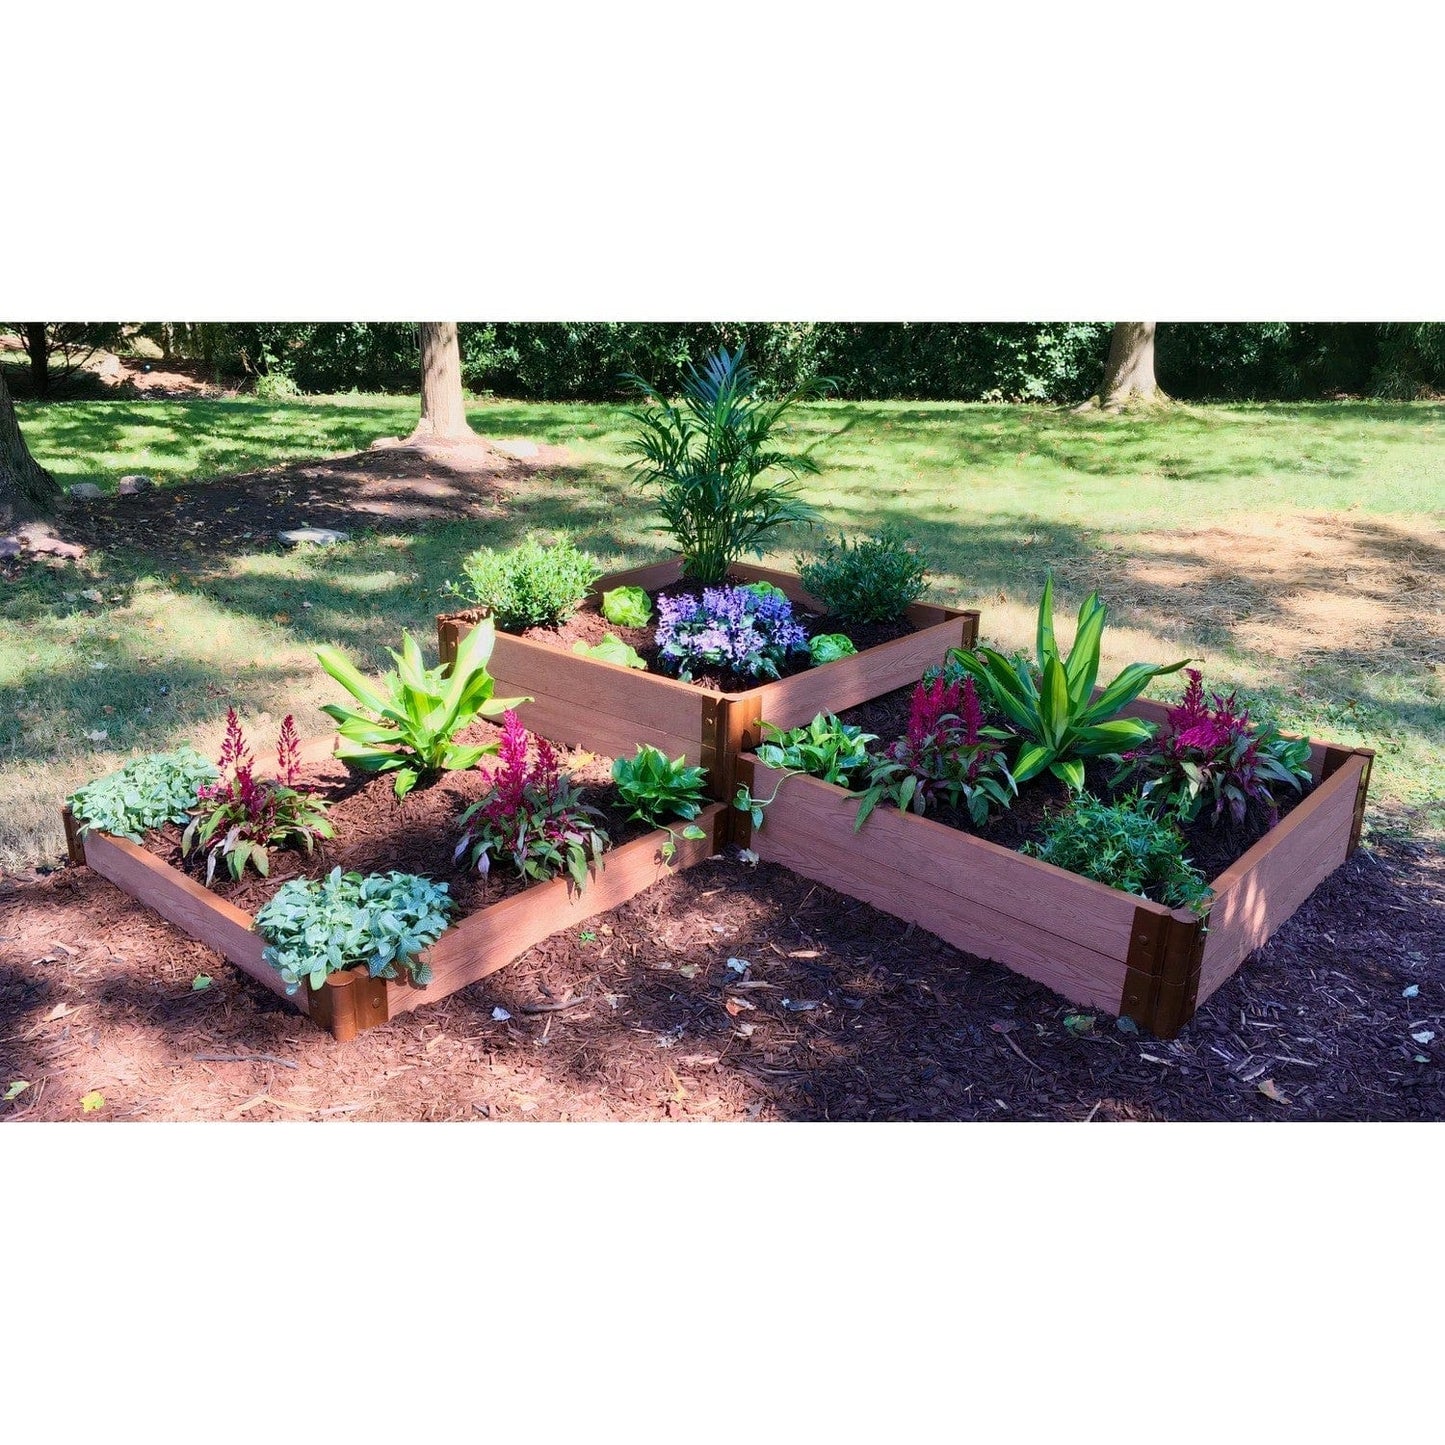 Frame It All Gardening Accessories Frame It All | Tool-Free Fort Knox Straight Corner Raised Garden Bed (Tri-Level) 8' X 8' X 16.5" - Uptown Brown - 1" Profile 800001023